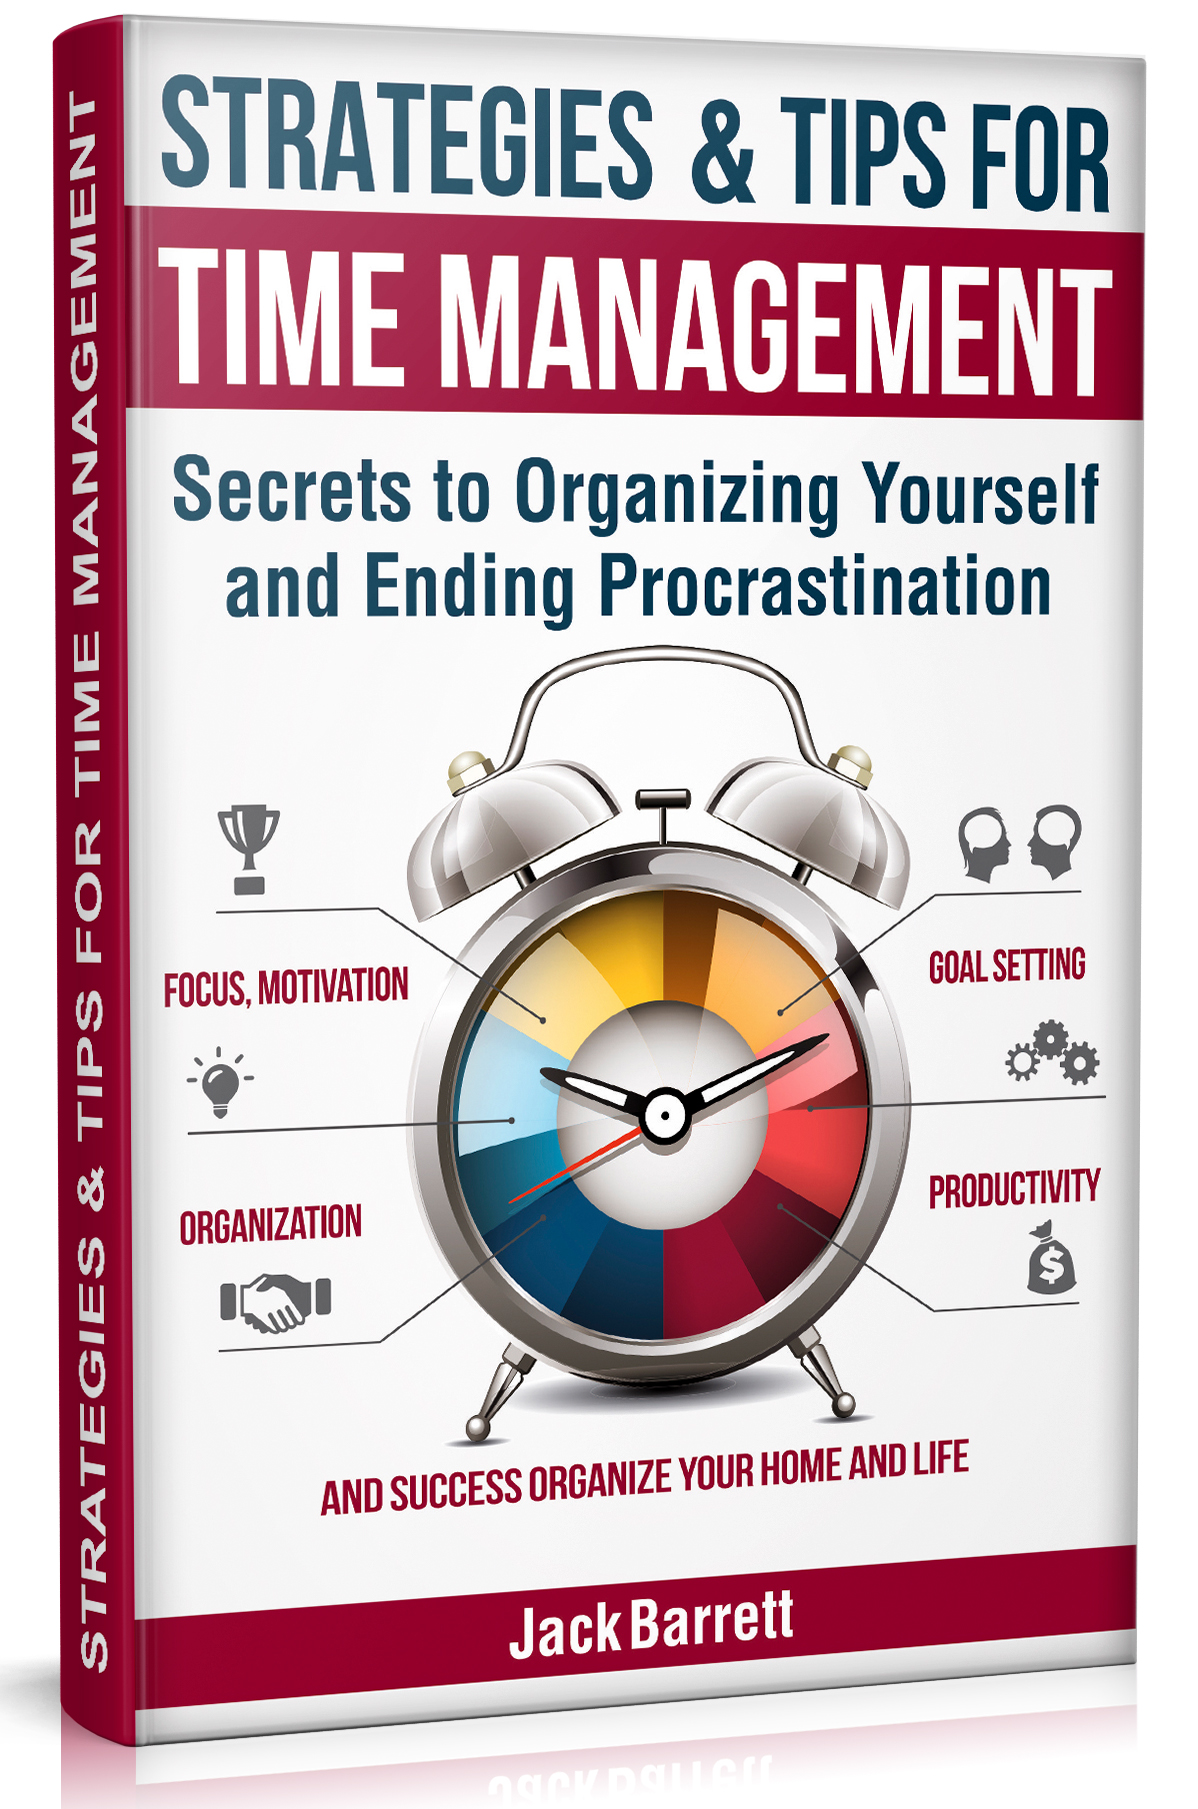 FREE: Strategies and Tips for Time Management: Secrets to Organizing Yourself and Ending Procrastination (Focus, Motivation, Organization, Goal Setting, Productivity, and Success Organizing Your Home) by Jack Barrett